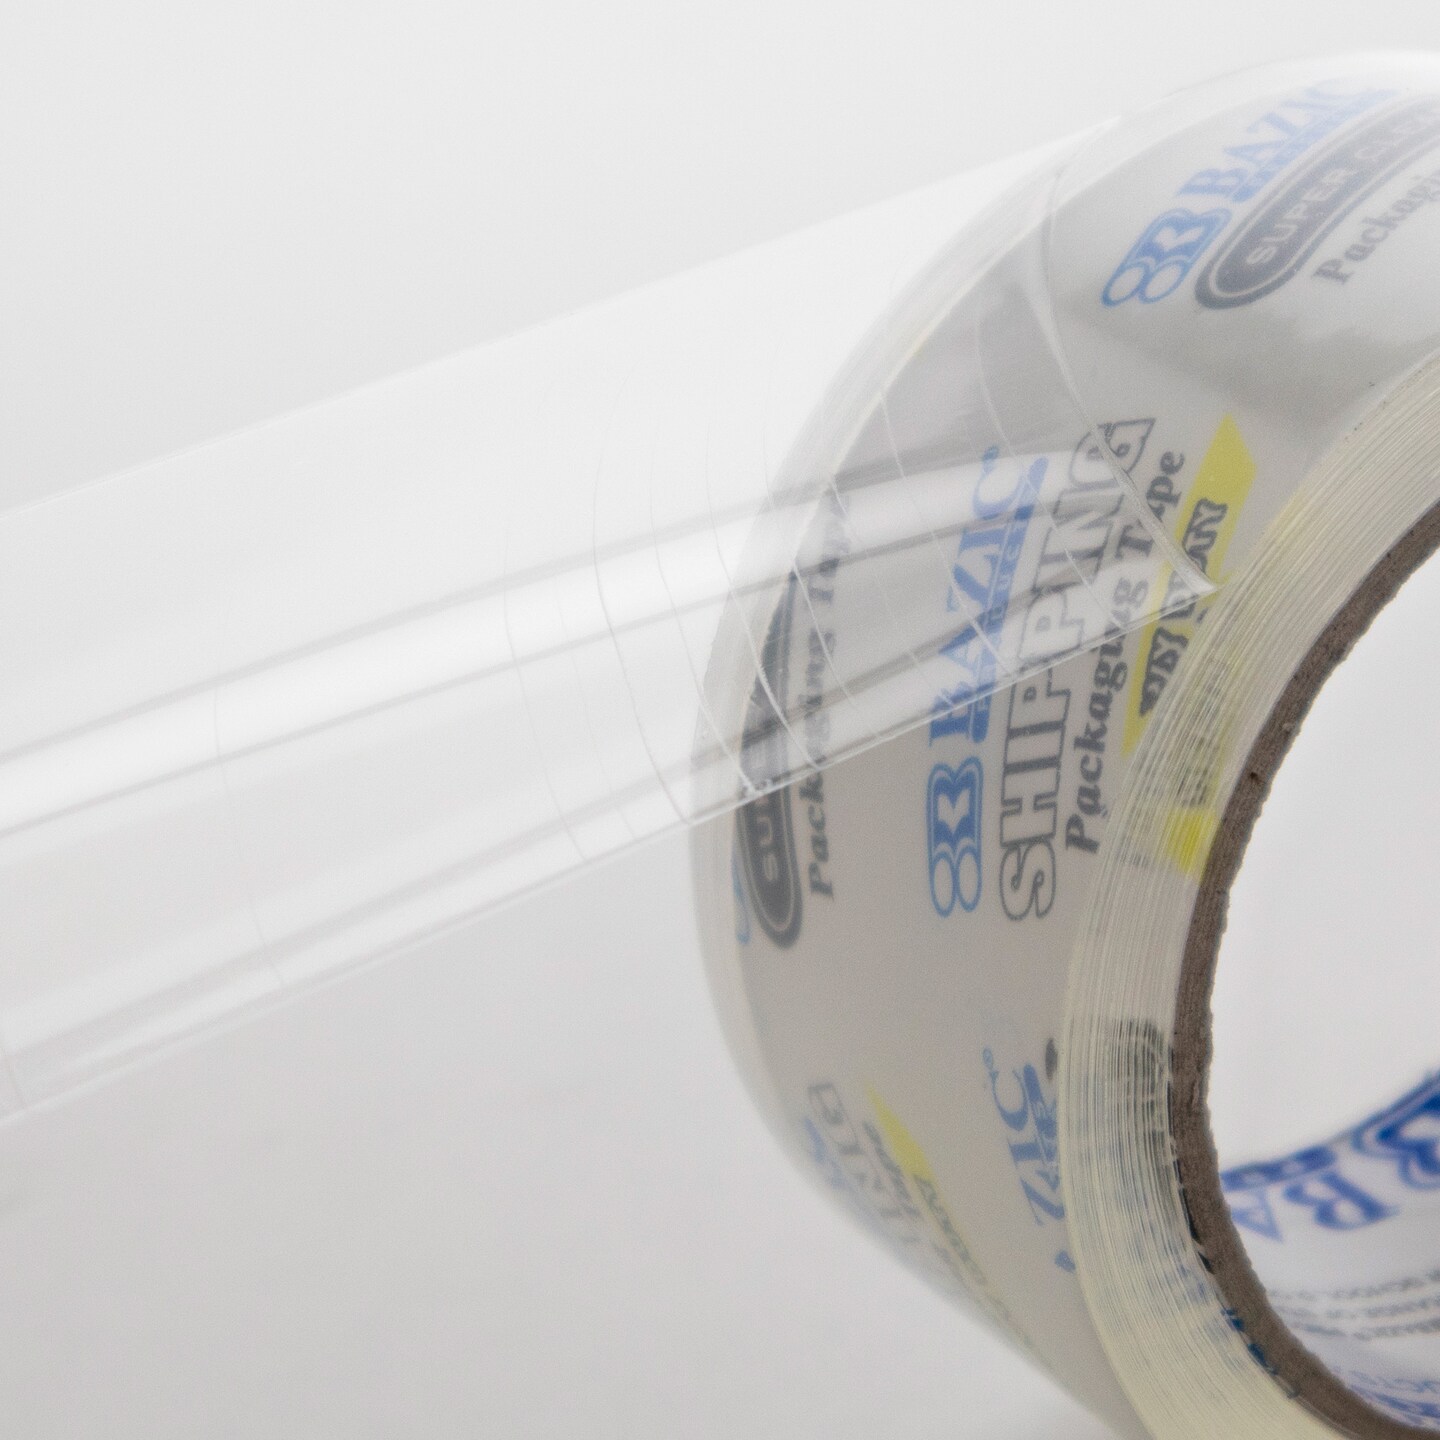 BAZIC Heavy Duty Super Clear Packing Tape 1.88&#x22; x 54.6 Yards